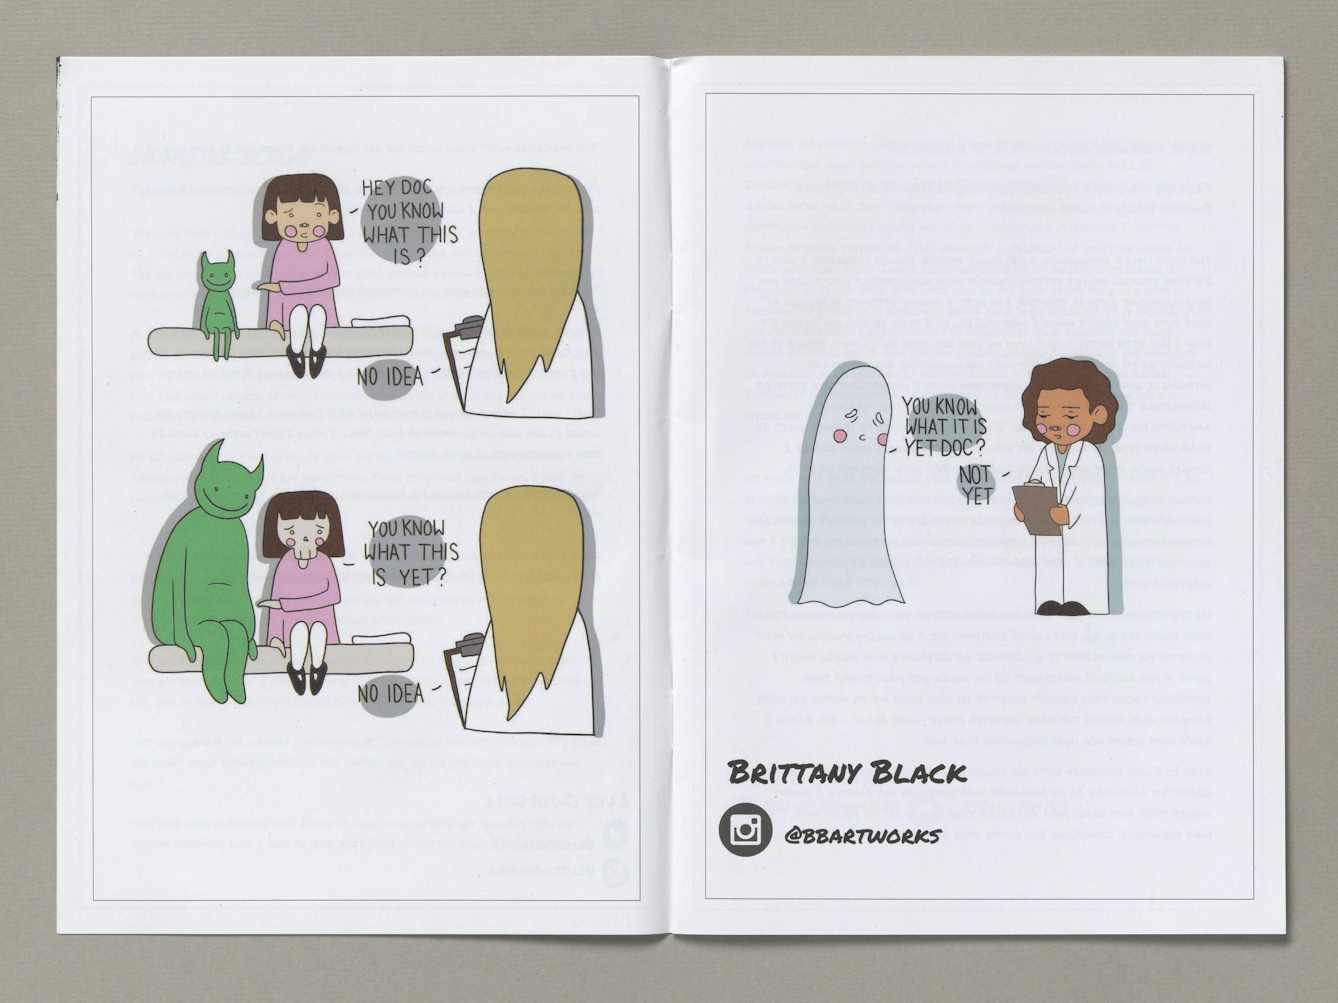 A two-page comic style spread from a zine showing a young woman with a green horned creature sitting next to her in a doctor's surgery, A white-coated doctor stands infront of her as she waits for a diagnosis. In the three successive scenes she gets progressively older until she turnes into a ghost, still asking what her diagnosis is. 